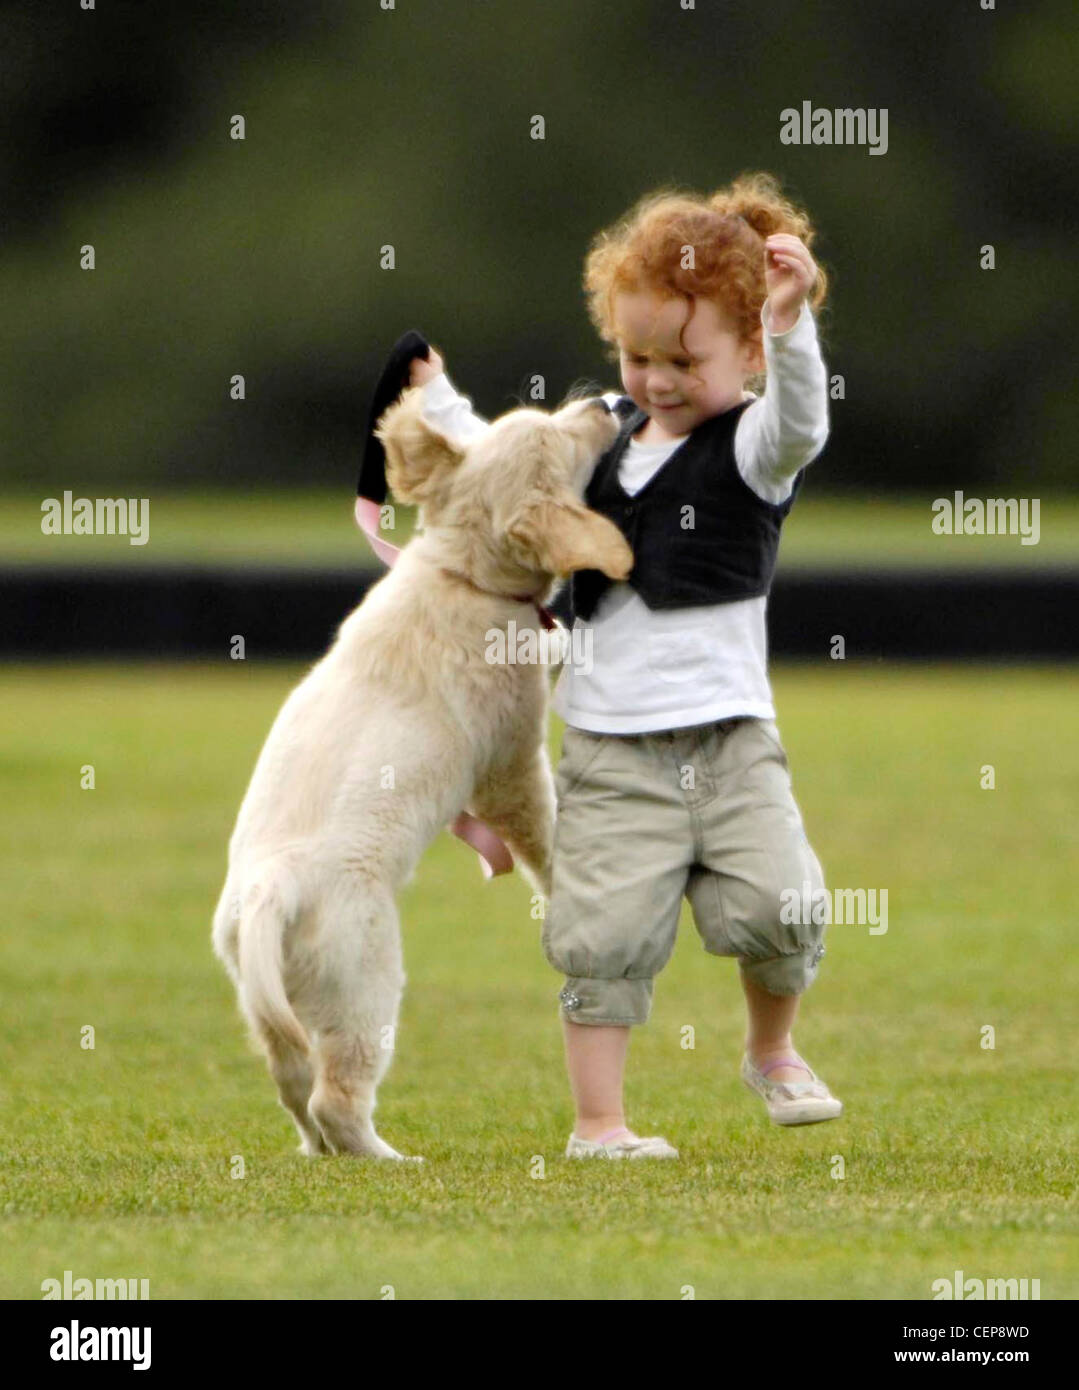 Female child curly red hair, wearing a white top long sleeves, black waistcoat, pale green cropped trousers and white shoes, Stock Photo